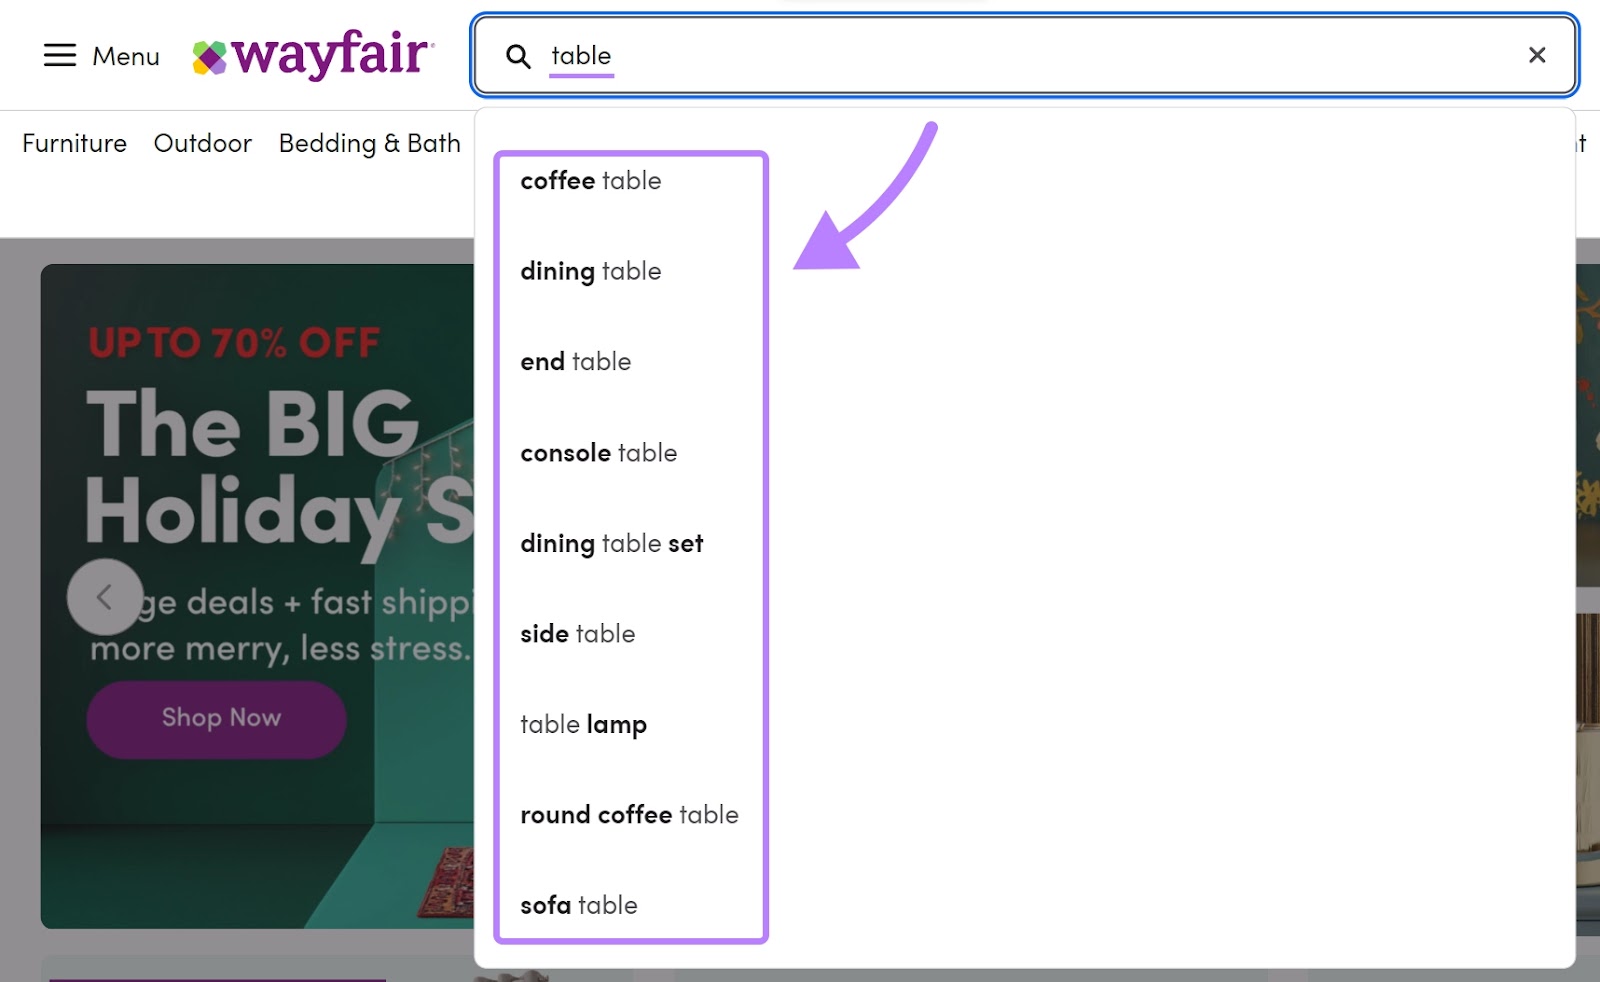 Wayfair’s search navigation suggestions when typing "table" in the search bar